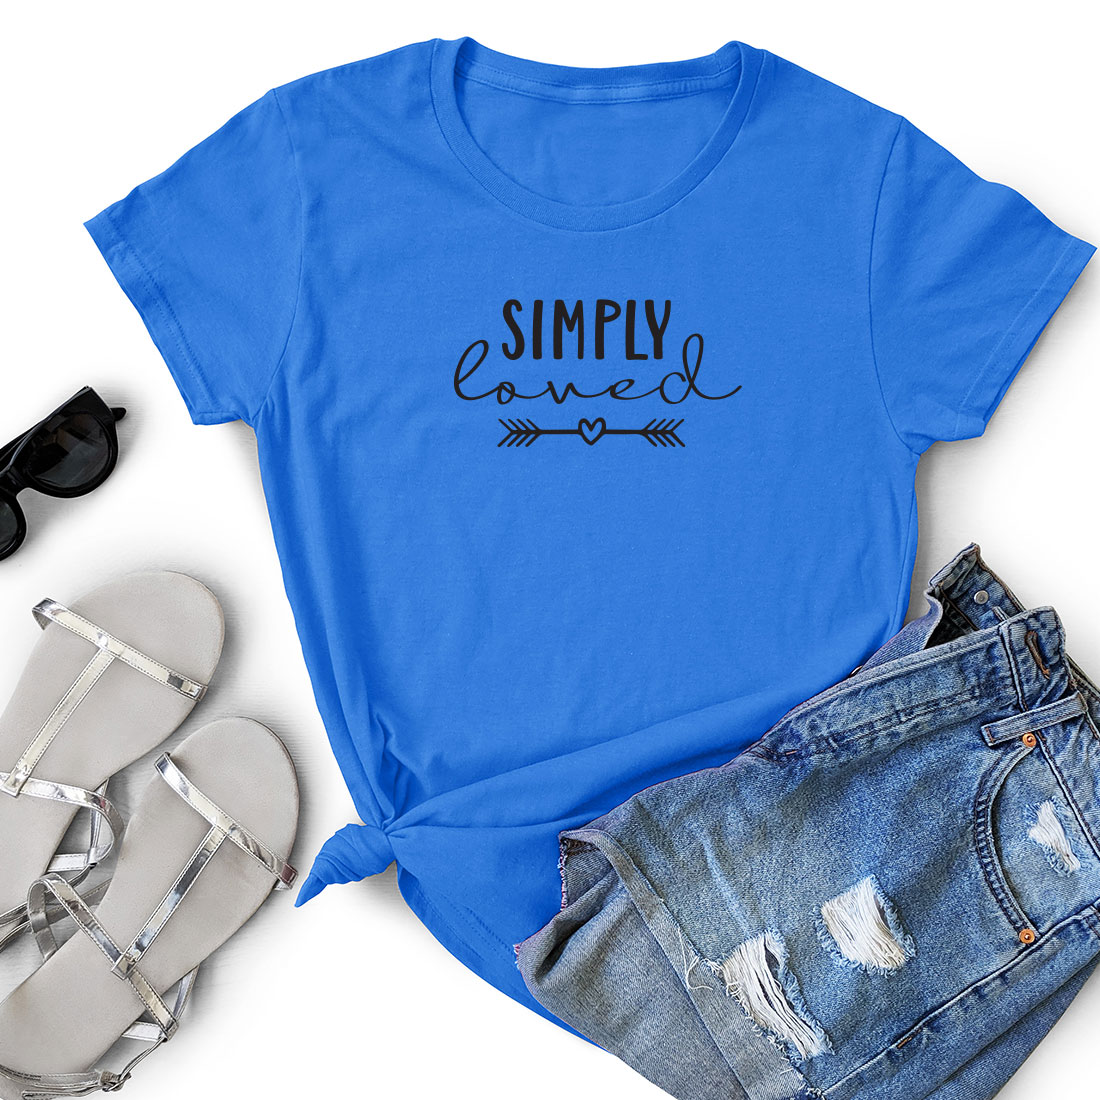 T - shirt that says simply loved next to a pair of shorts.